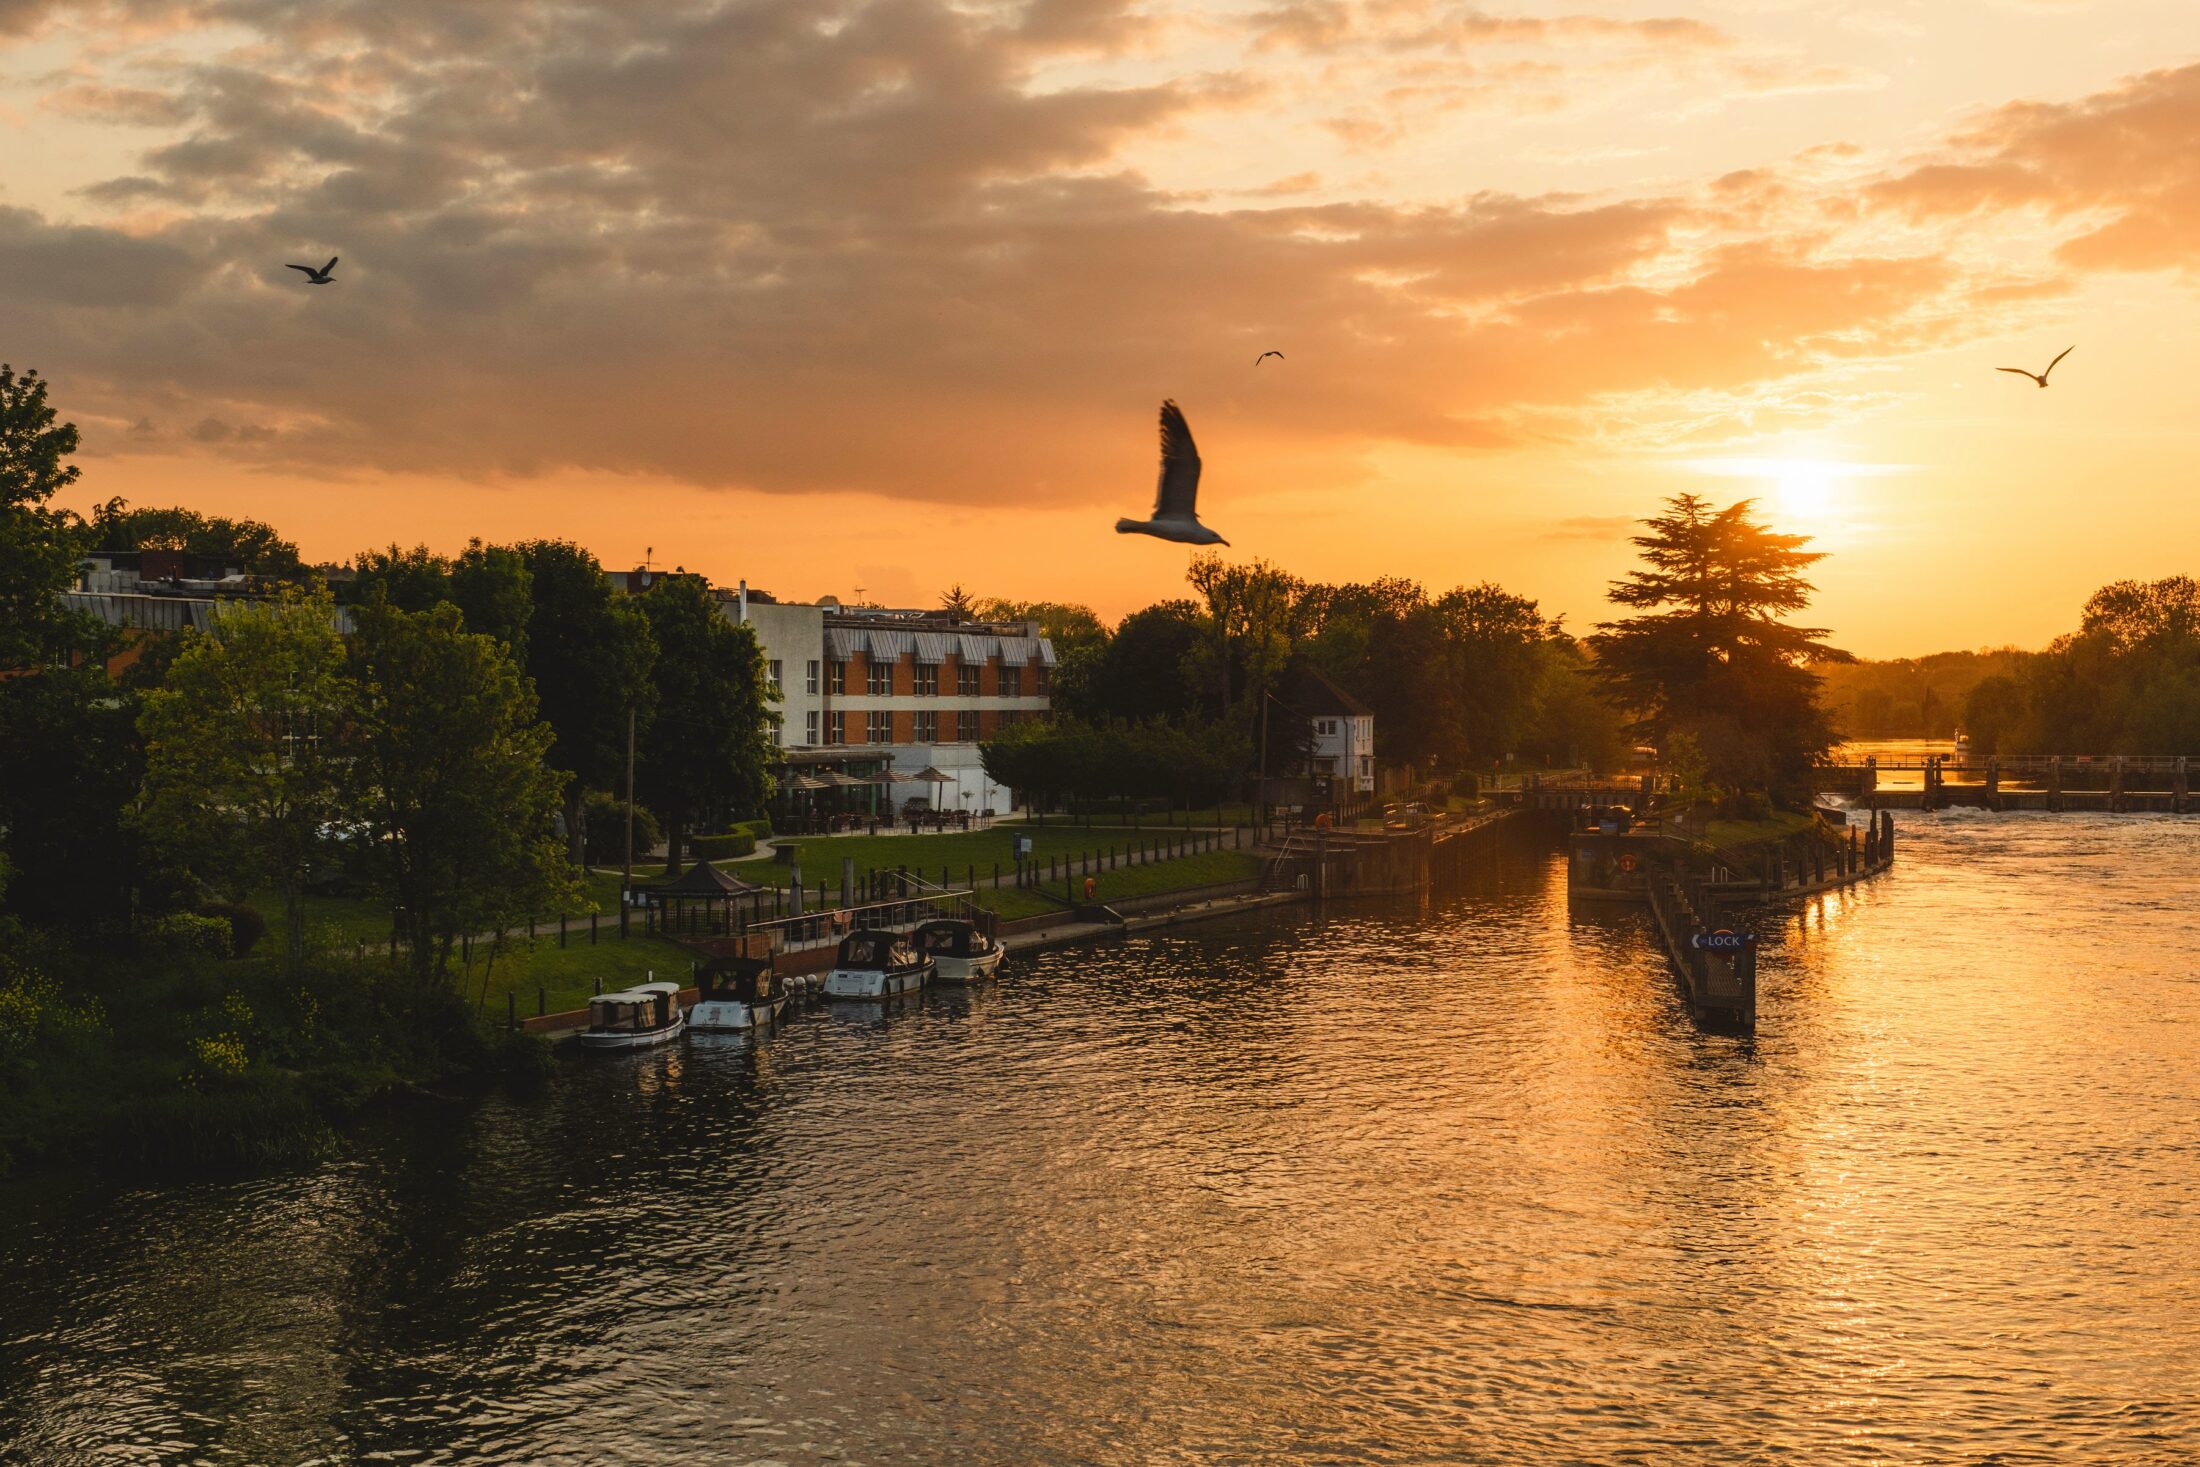 The Runnymede on Thames sunset